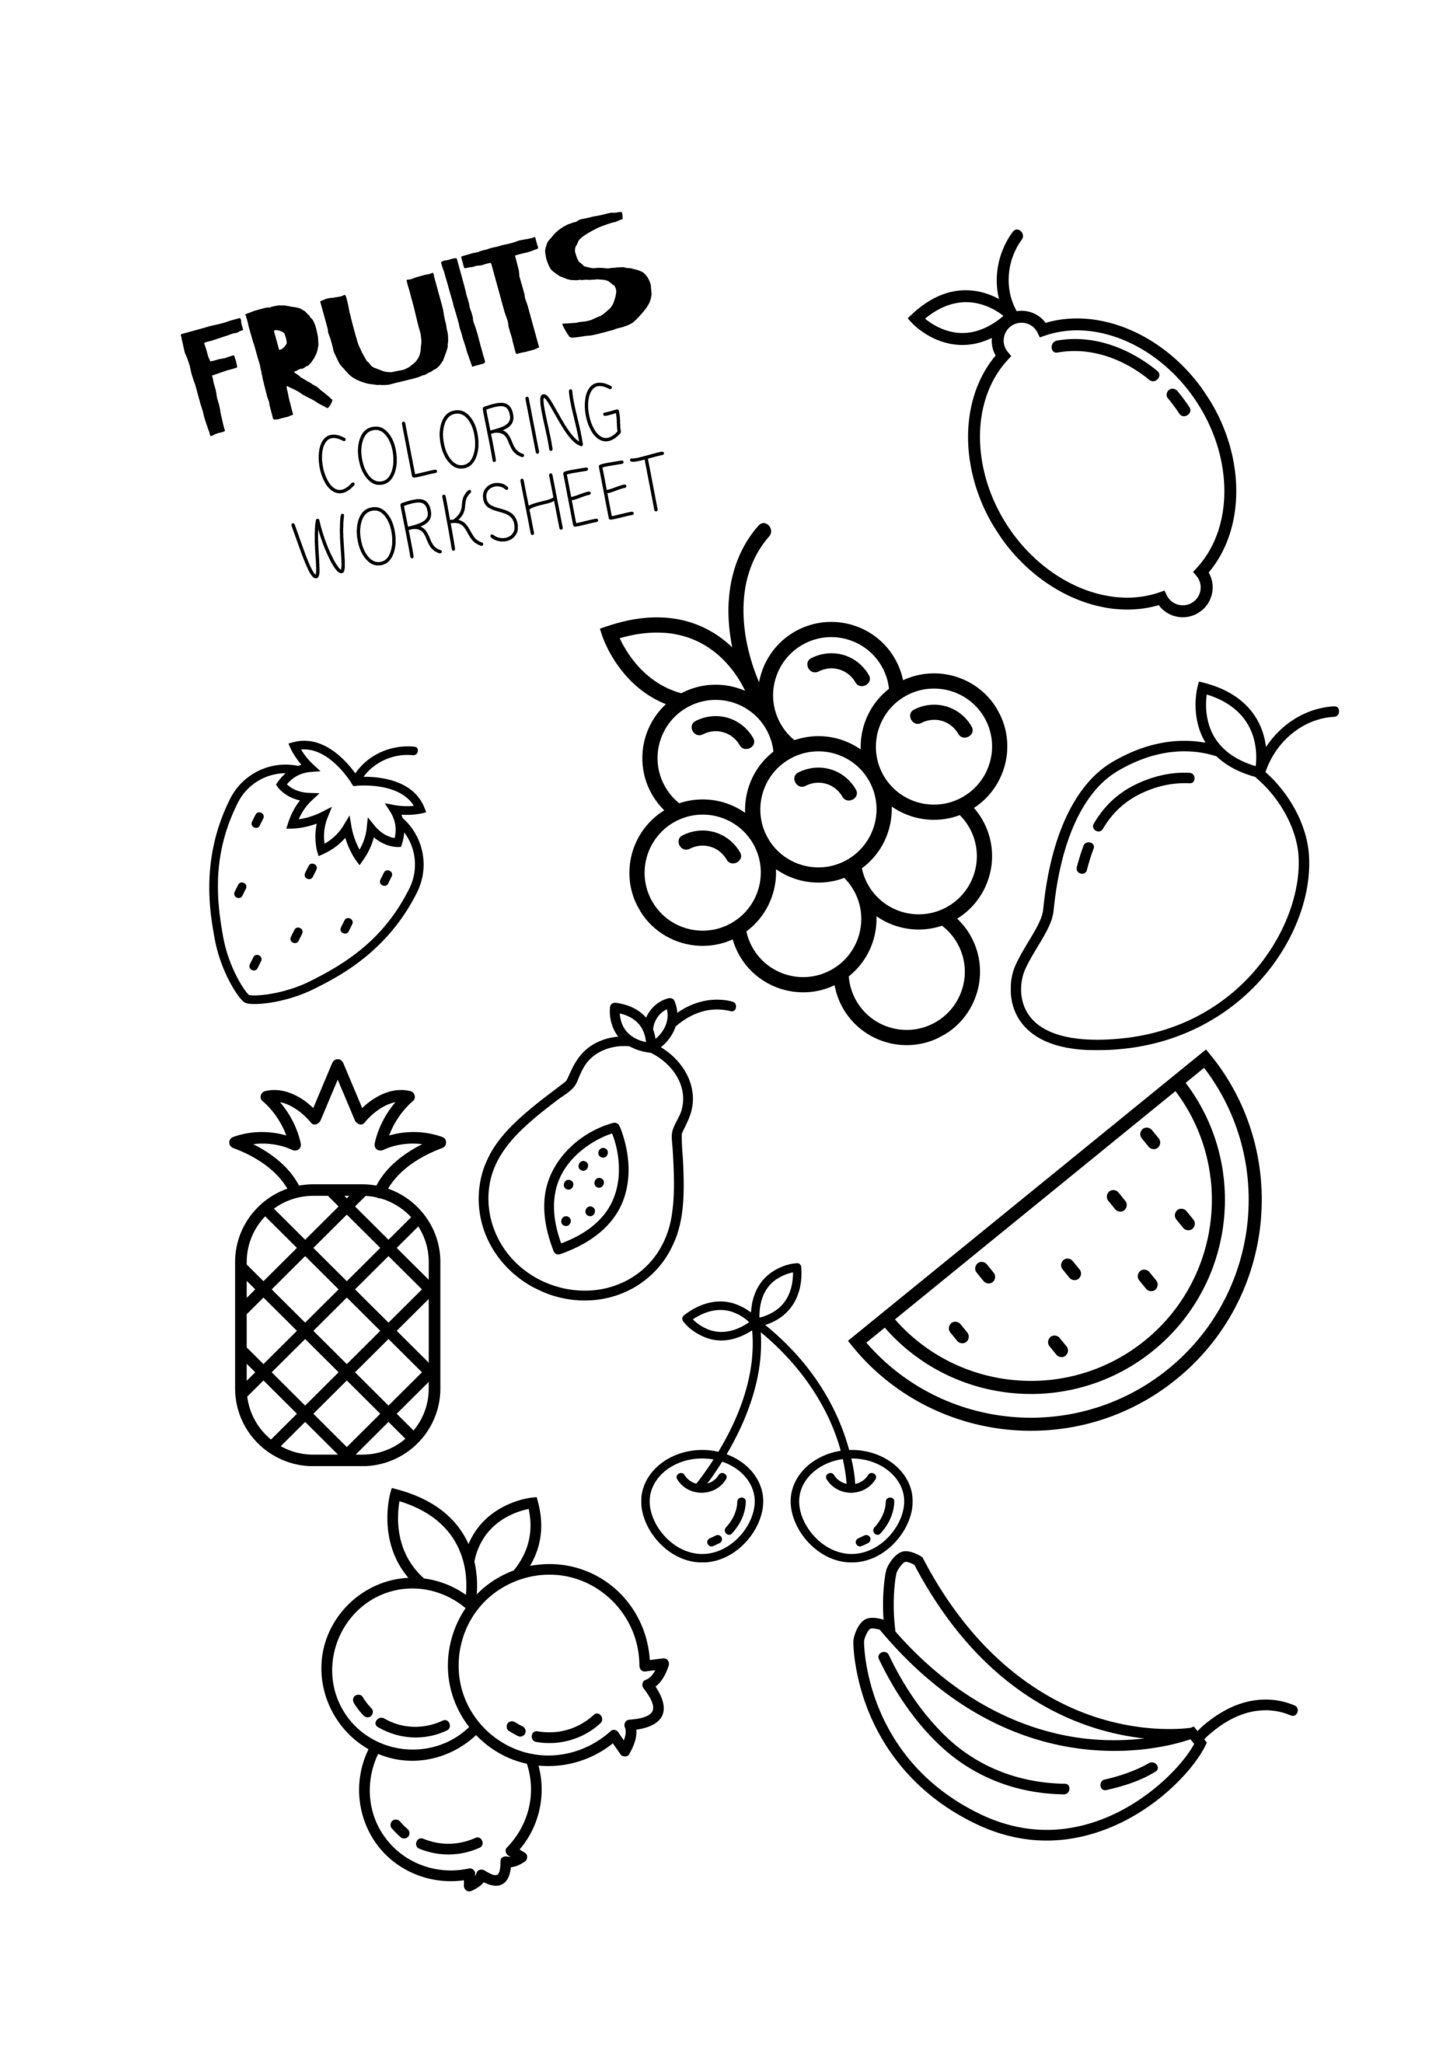 11+ Coloring Pages of Fruits Free Preschool